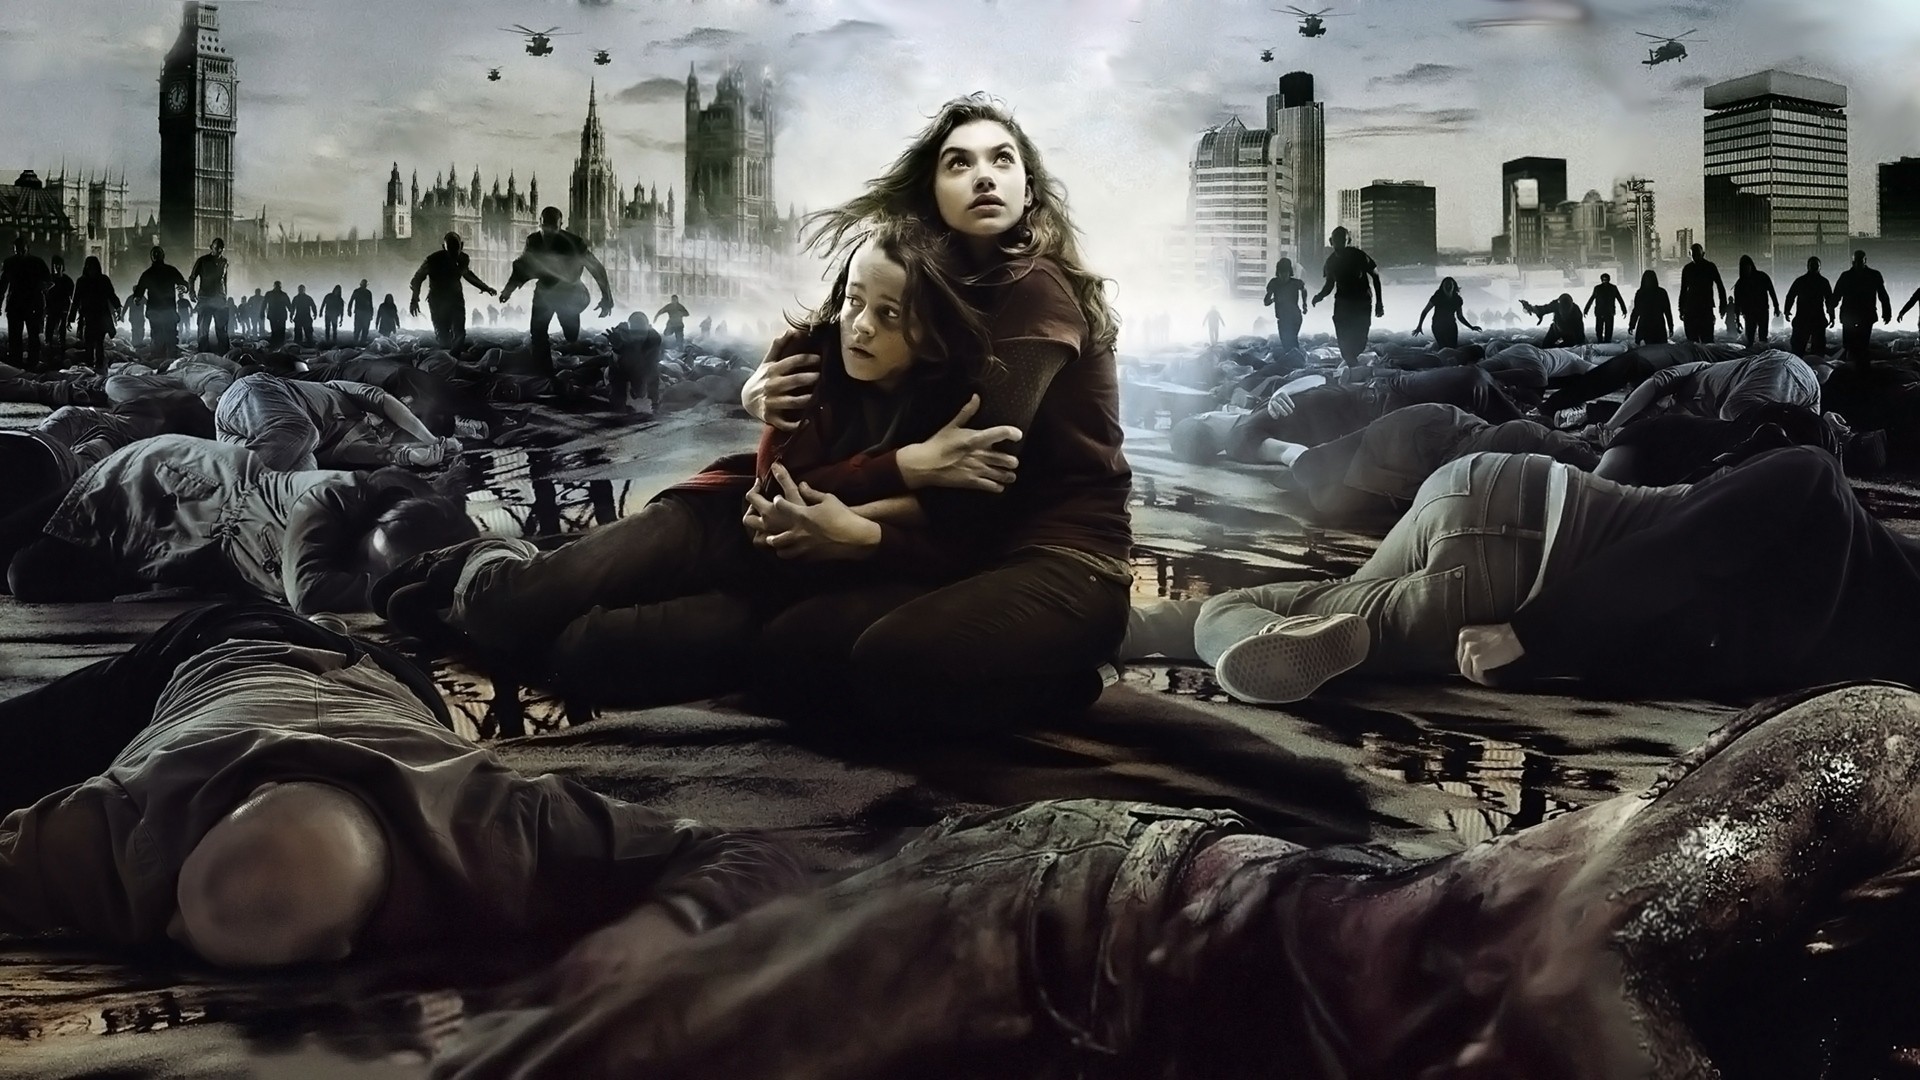 Amazing 28 Weeks Later Pictures & Backgrounds